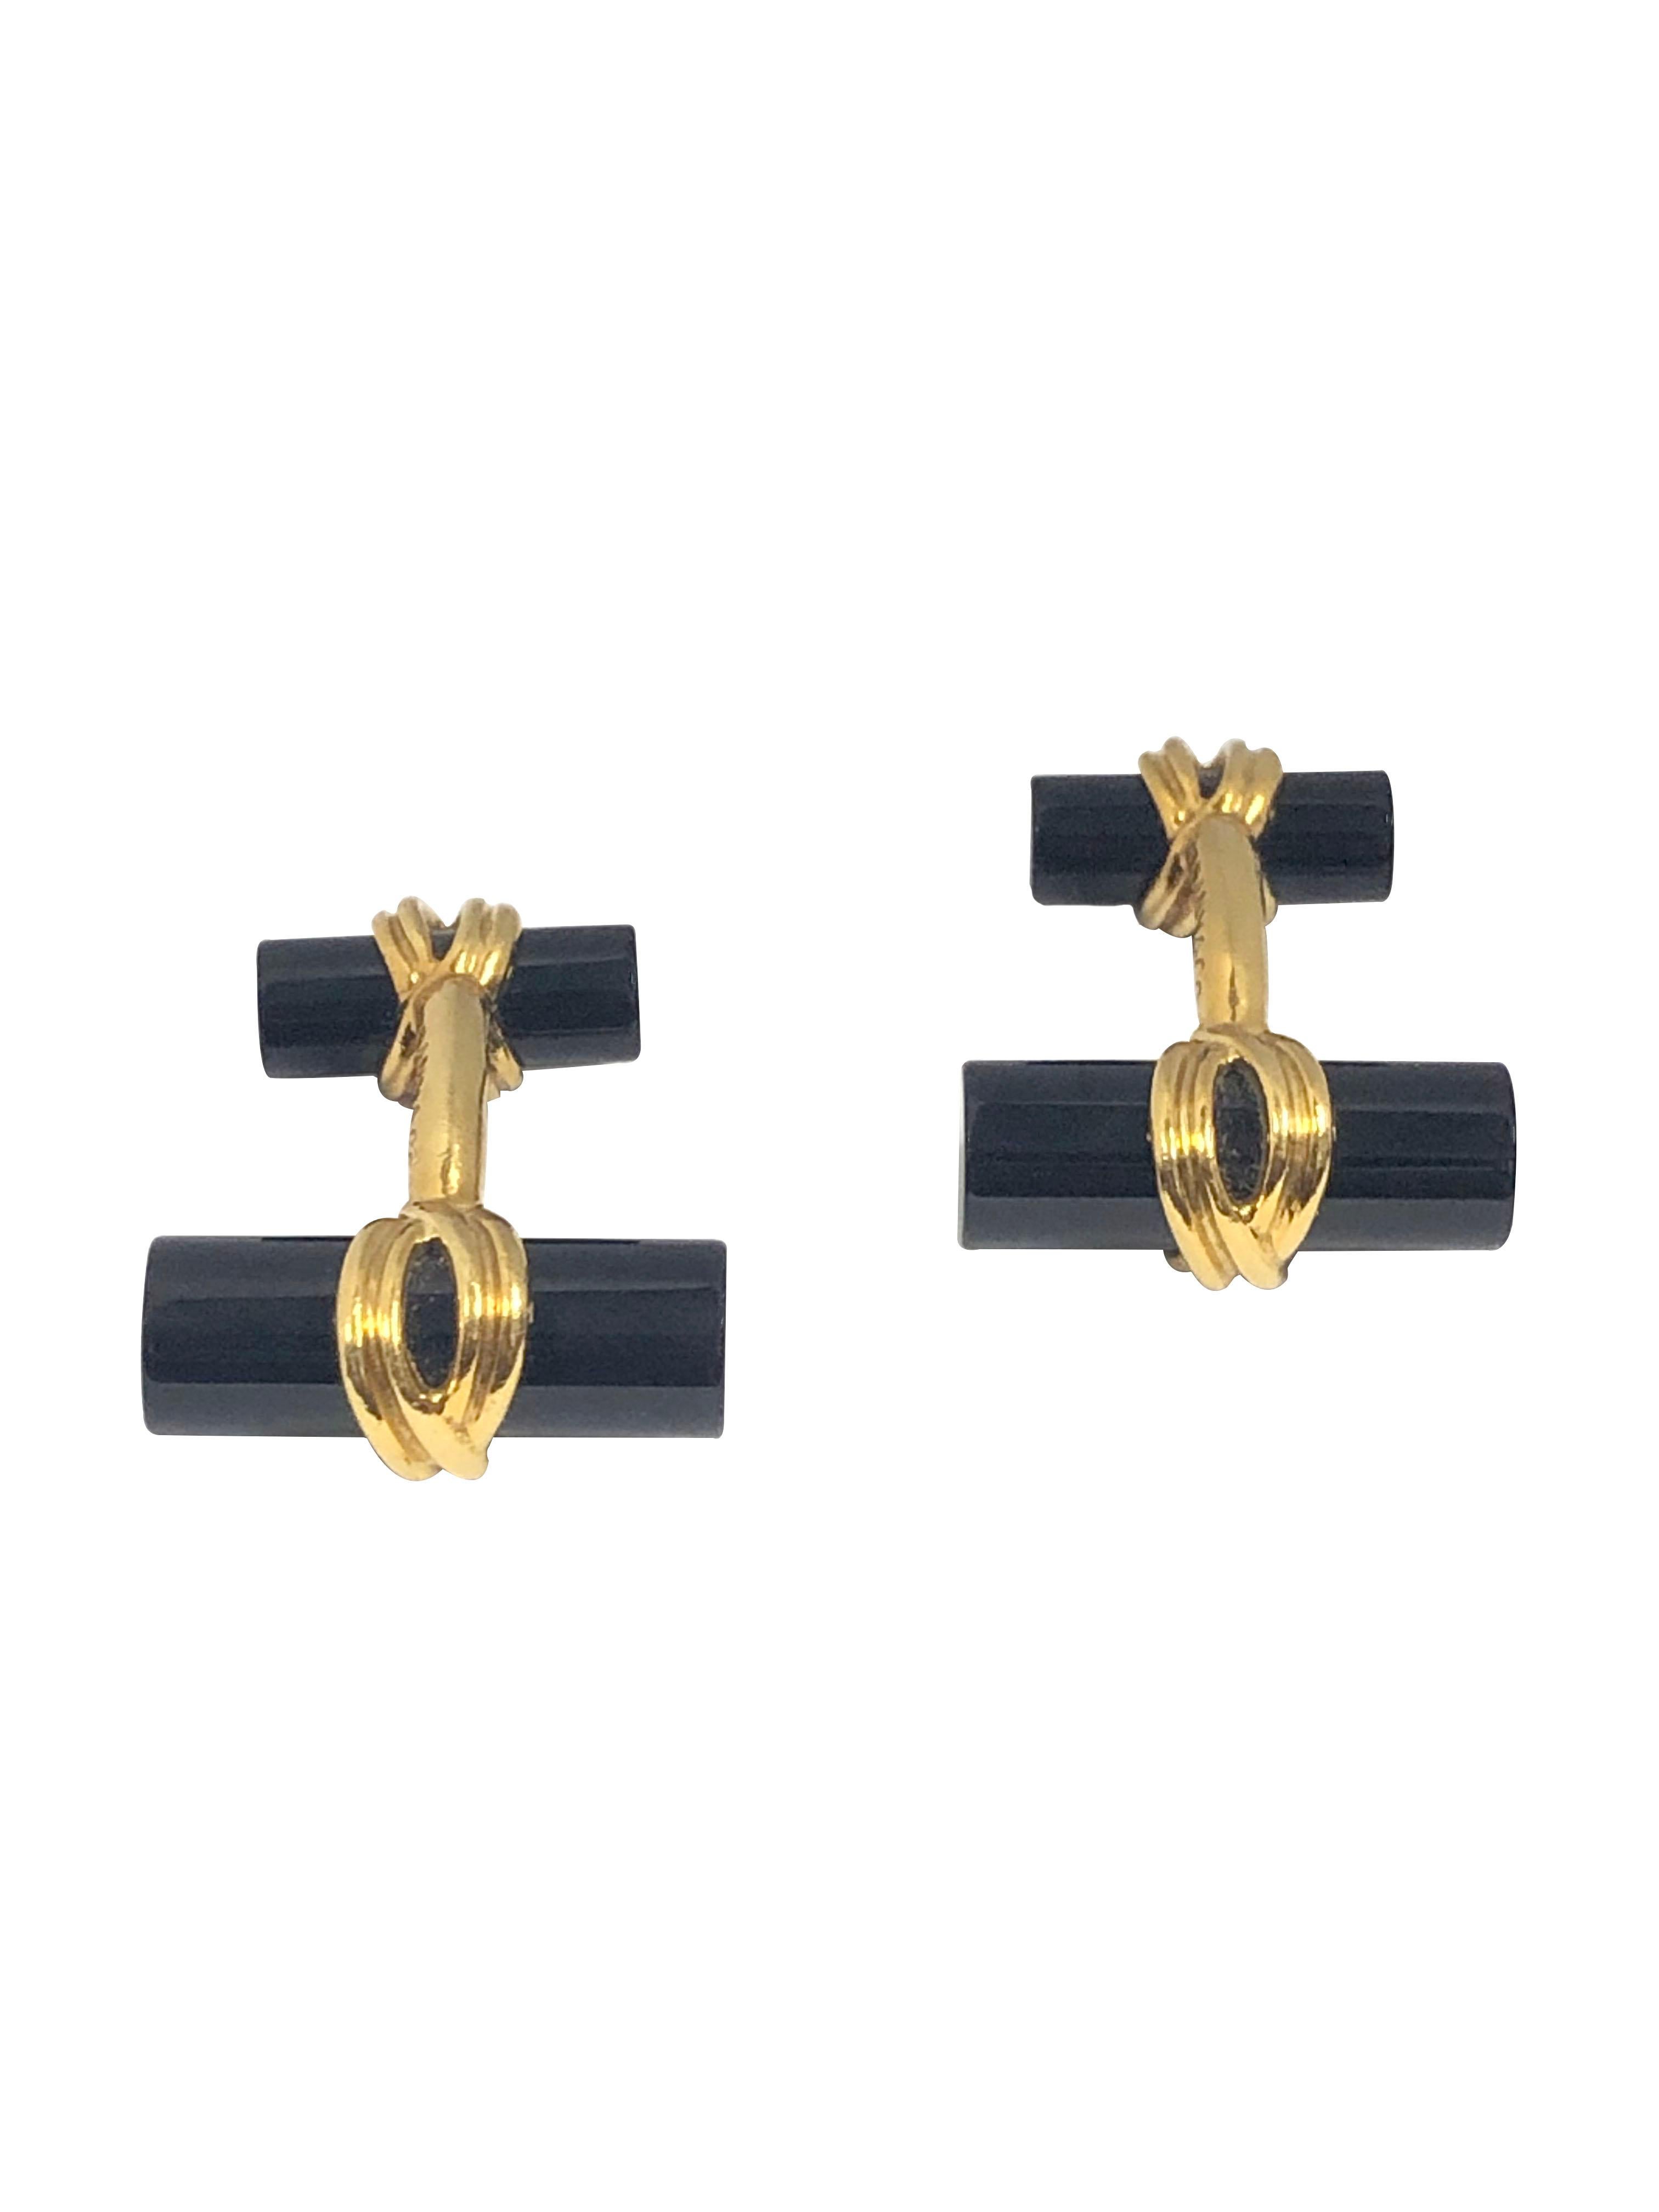 Circa 2000 Tiffany & Company Cufflinks, 18K Yellow Gold and onyx, the onyx measures 3/4 inch in length. 